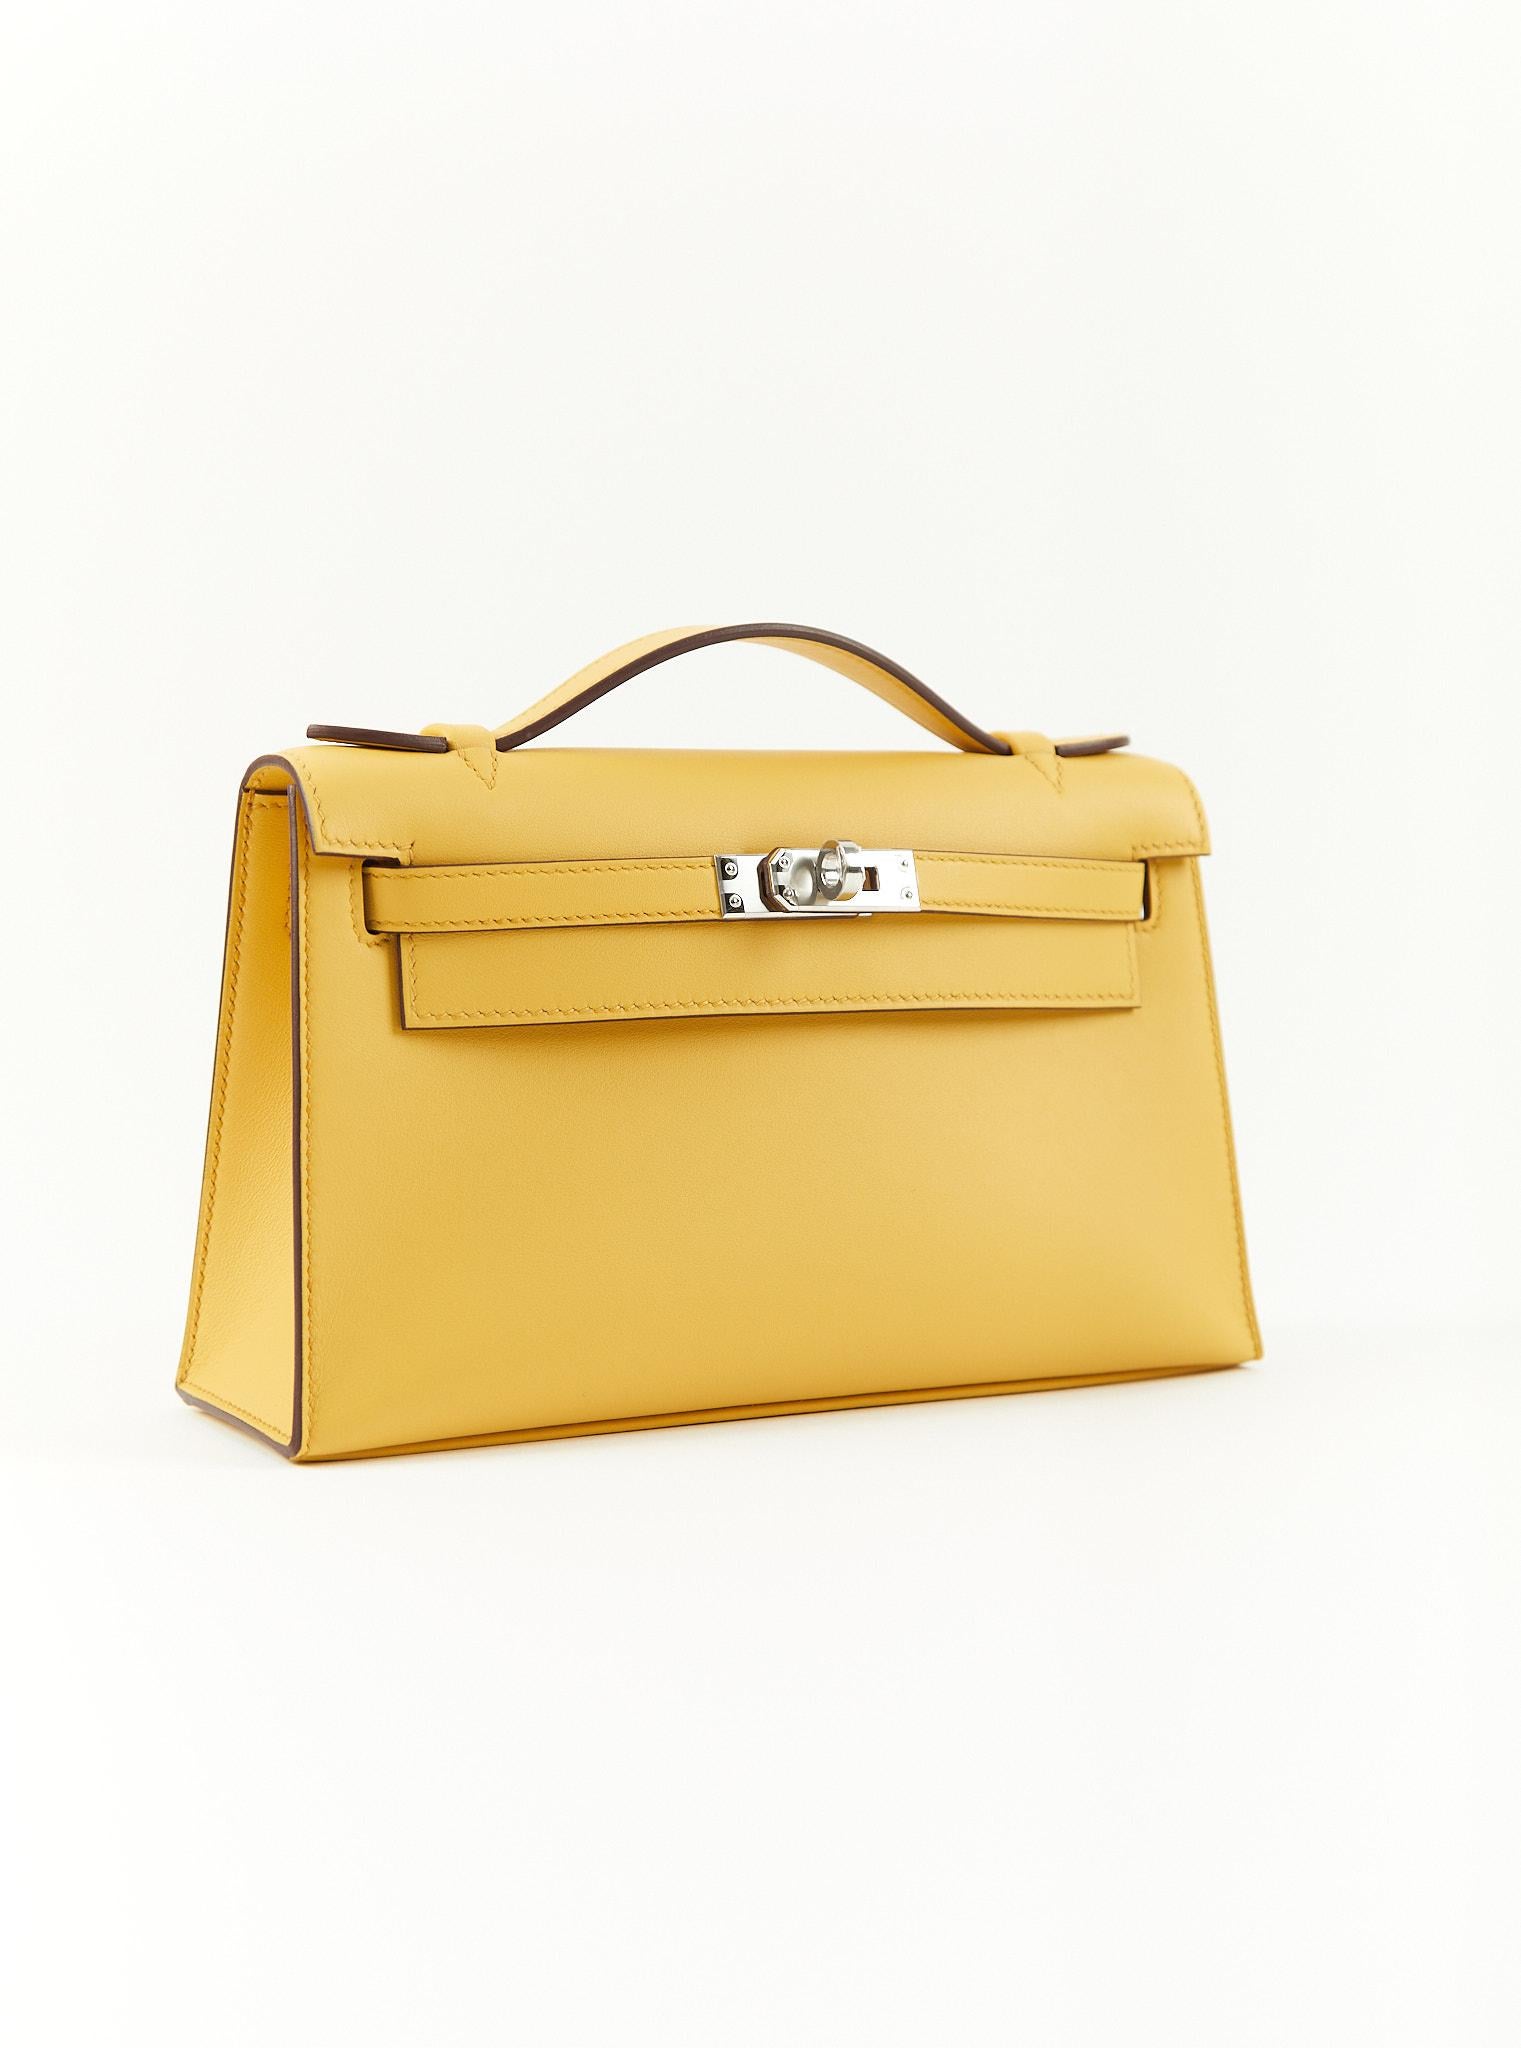 Hermès Kelly Pochette in Sun

Swift Leather with Palladium Hardware

W Stamp / 2024

Accompanied by: Original receipt, Hermes box, Hermes dustbag, felt, ribbon and care card

Measurements: 8.5